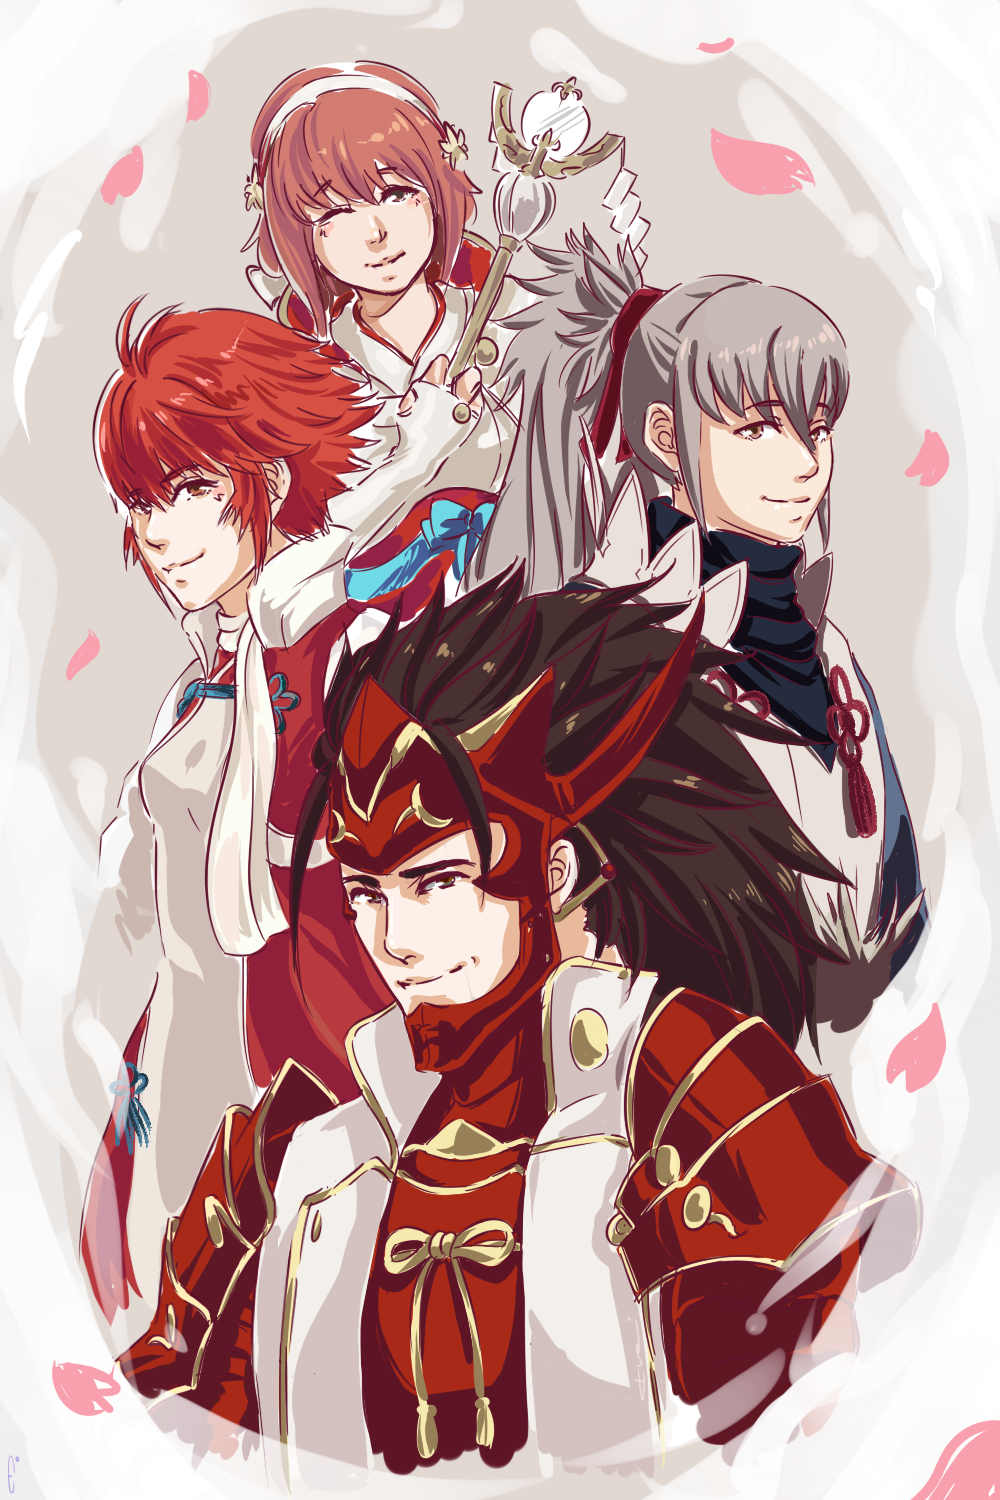 2boys 2girls armor brother_and_sister brothers brown_hair cherry_blossoms commentary erisupaisu fire_emblem fire_emblem_if gloves grey_hair hairband highres hinoka_(fire_emblem_if) holding japanese_armor long_hair multiple_boys multiple_girls one_eye_closed pink_hair ponytail redhead ryouma_(fire_emblem_if) sakura_(fire_emblem_if) short_hair siblings simple_background sisters smile staff takumi_(fire_emblem_if) upper_body